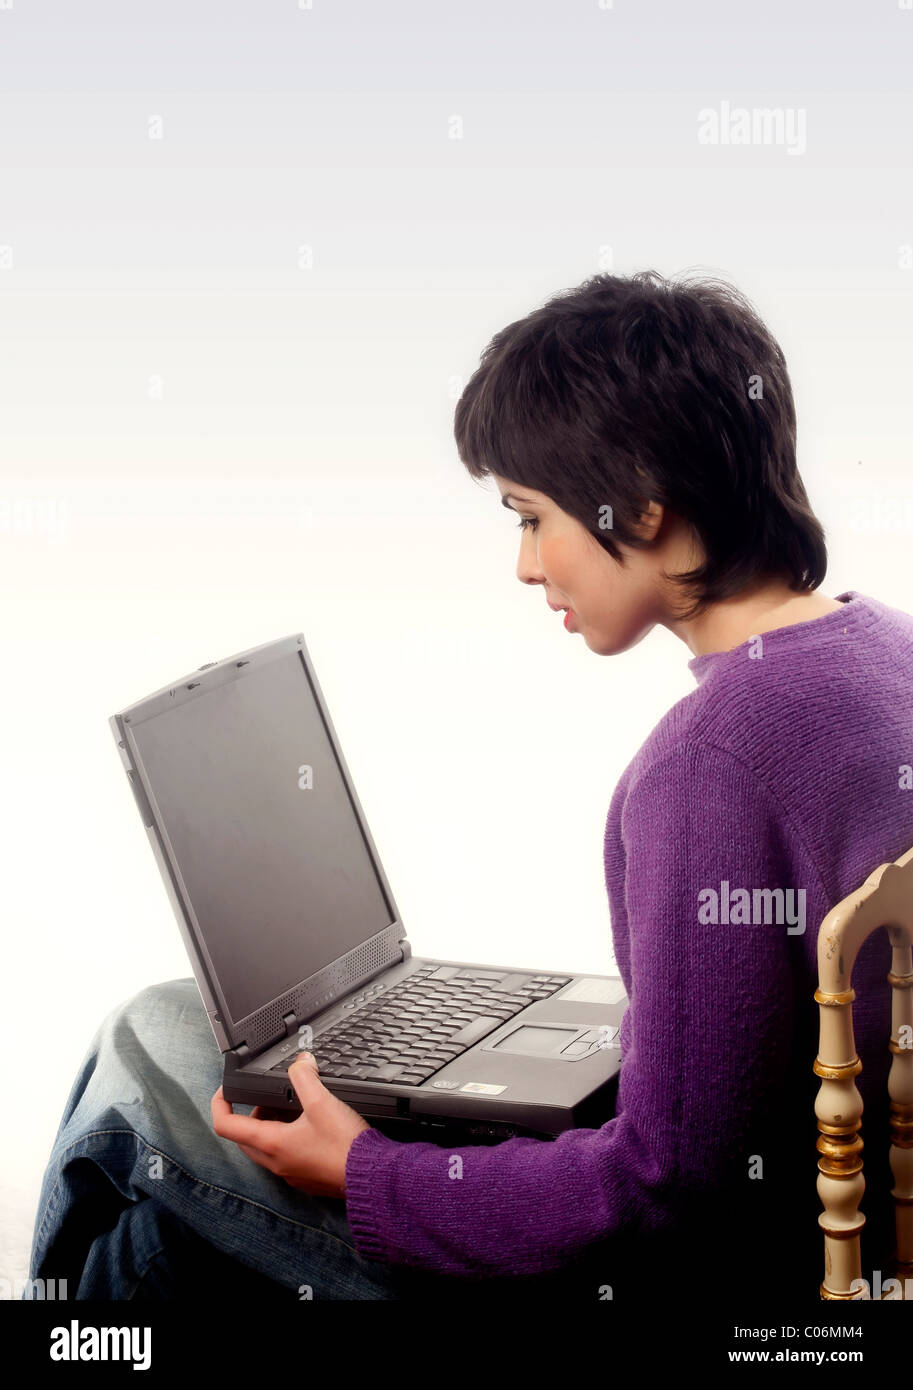 Latin girl with a laptop Stock Photo